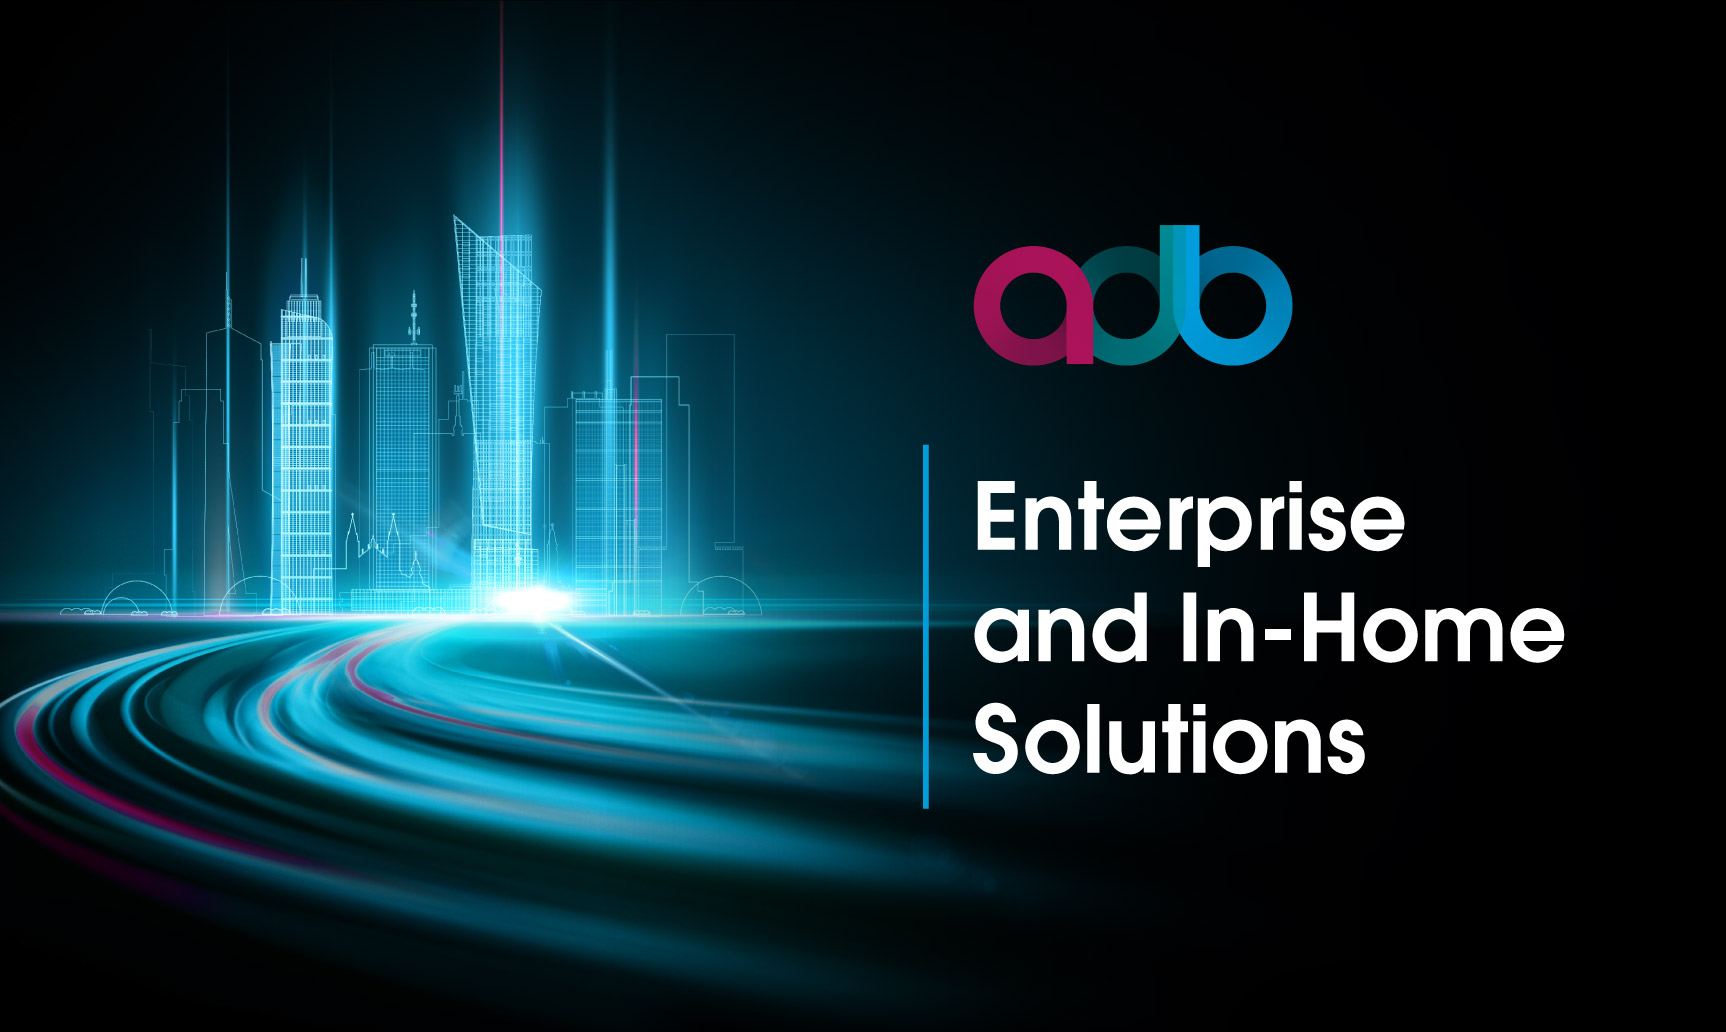 ADB launches Enterprise and In-Home Solutions